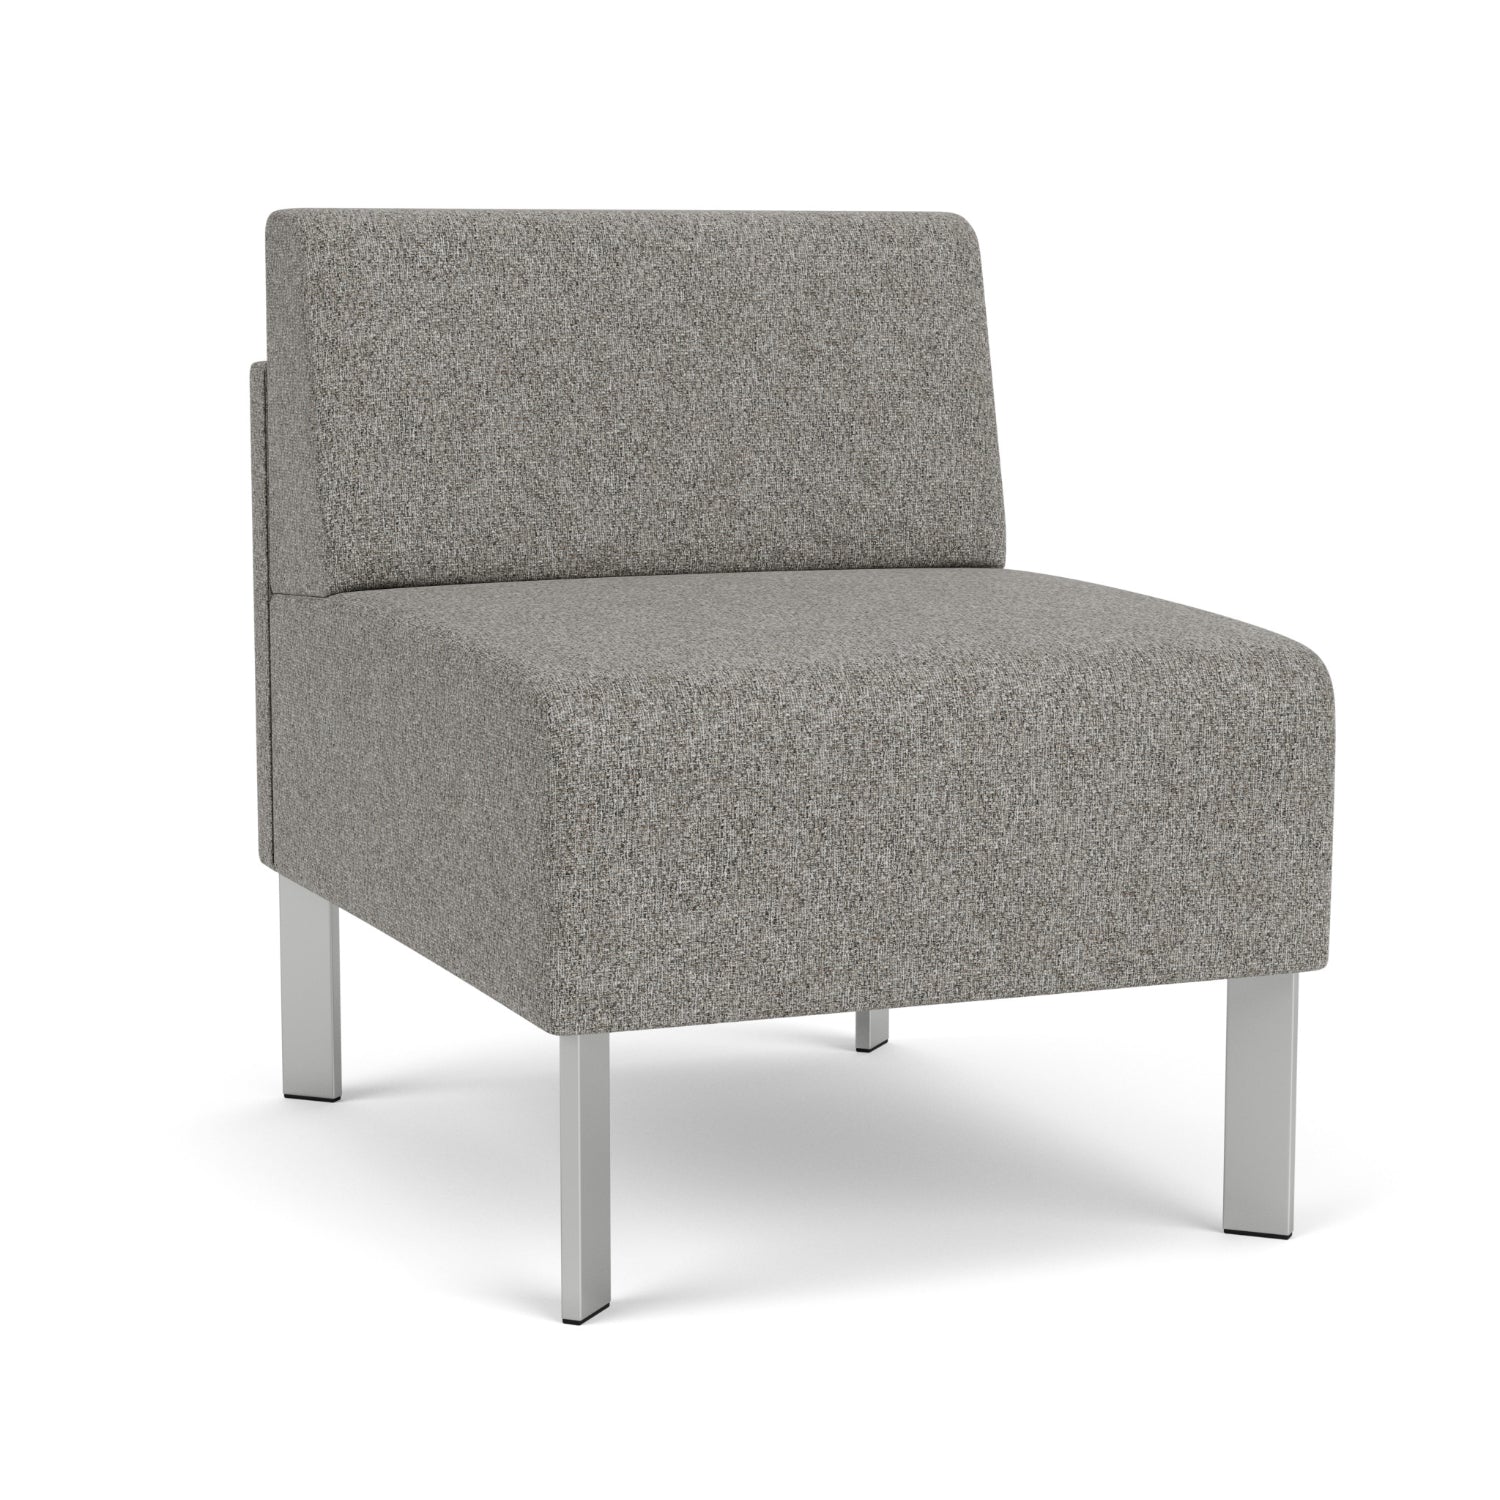 Luxe Collection Reception Seating, Armless Guest Chair, Standard Fabric Upholstery, FREE SHIPPING